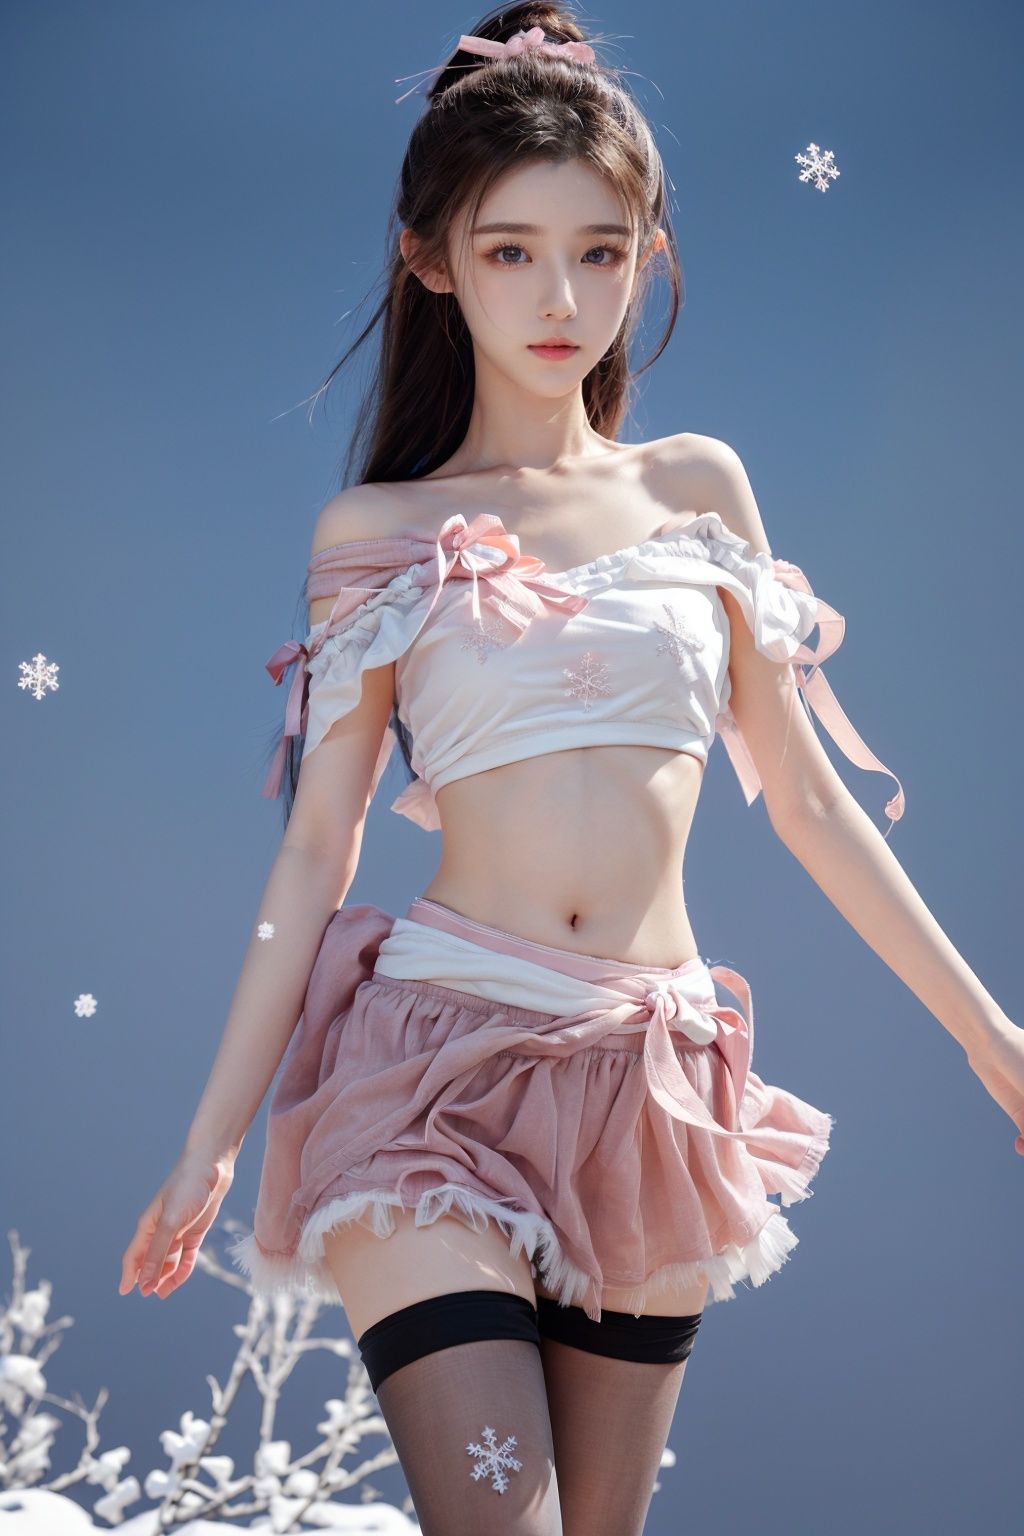  ,(masterpiece), (top quality, best quality, official art, beauty and aesthetics:1.2),Hazy, dreamy atmosphere,Ray tracing, Gaussian blur,Halos, particle effects,cg photos,1girl,(slender legs:1.3),long legs,long hair,Chest fluffy decoration, pink fluffy,(pink fluff:1.25), (pink skirt:1.25),(pink miniskirt:1.25),(black pantyhose:1.3),(pink ribbon:1.15),(solo:1.2),mature_female,(bare_shoulder:1.35),(bare_navel:1.35),(bare_waist:1.5),closed_mouth,smooth skin,(tight:1.2),(Short neck1.15),,Smooth skin, fair skin,tender skin,sexy girl,Royal Sister,RoyalSister face,looking_at_viewer,deep pink background, Snow background,falling_snow,(falling snowflakes:1.5),ice crystal,transparent,from_side,,,blackpantyhose,hanikezi,lips